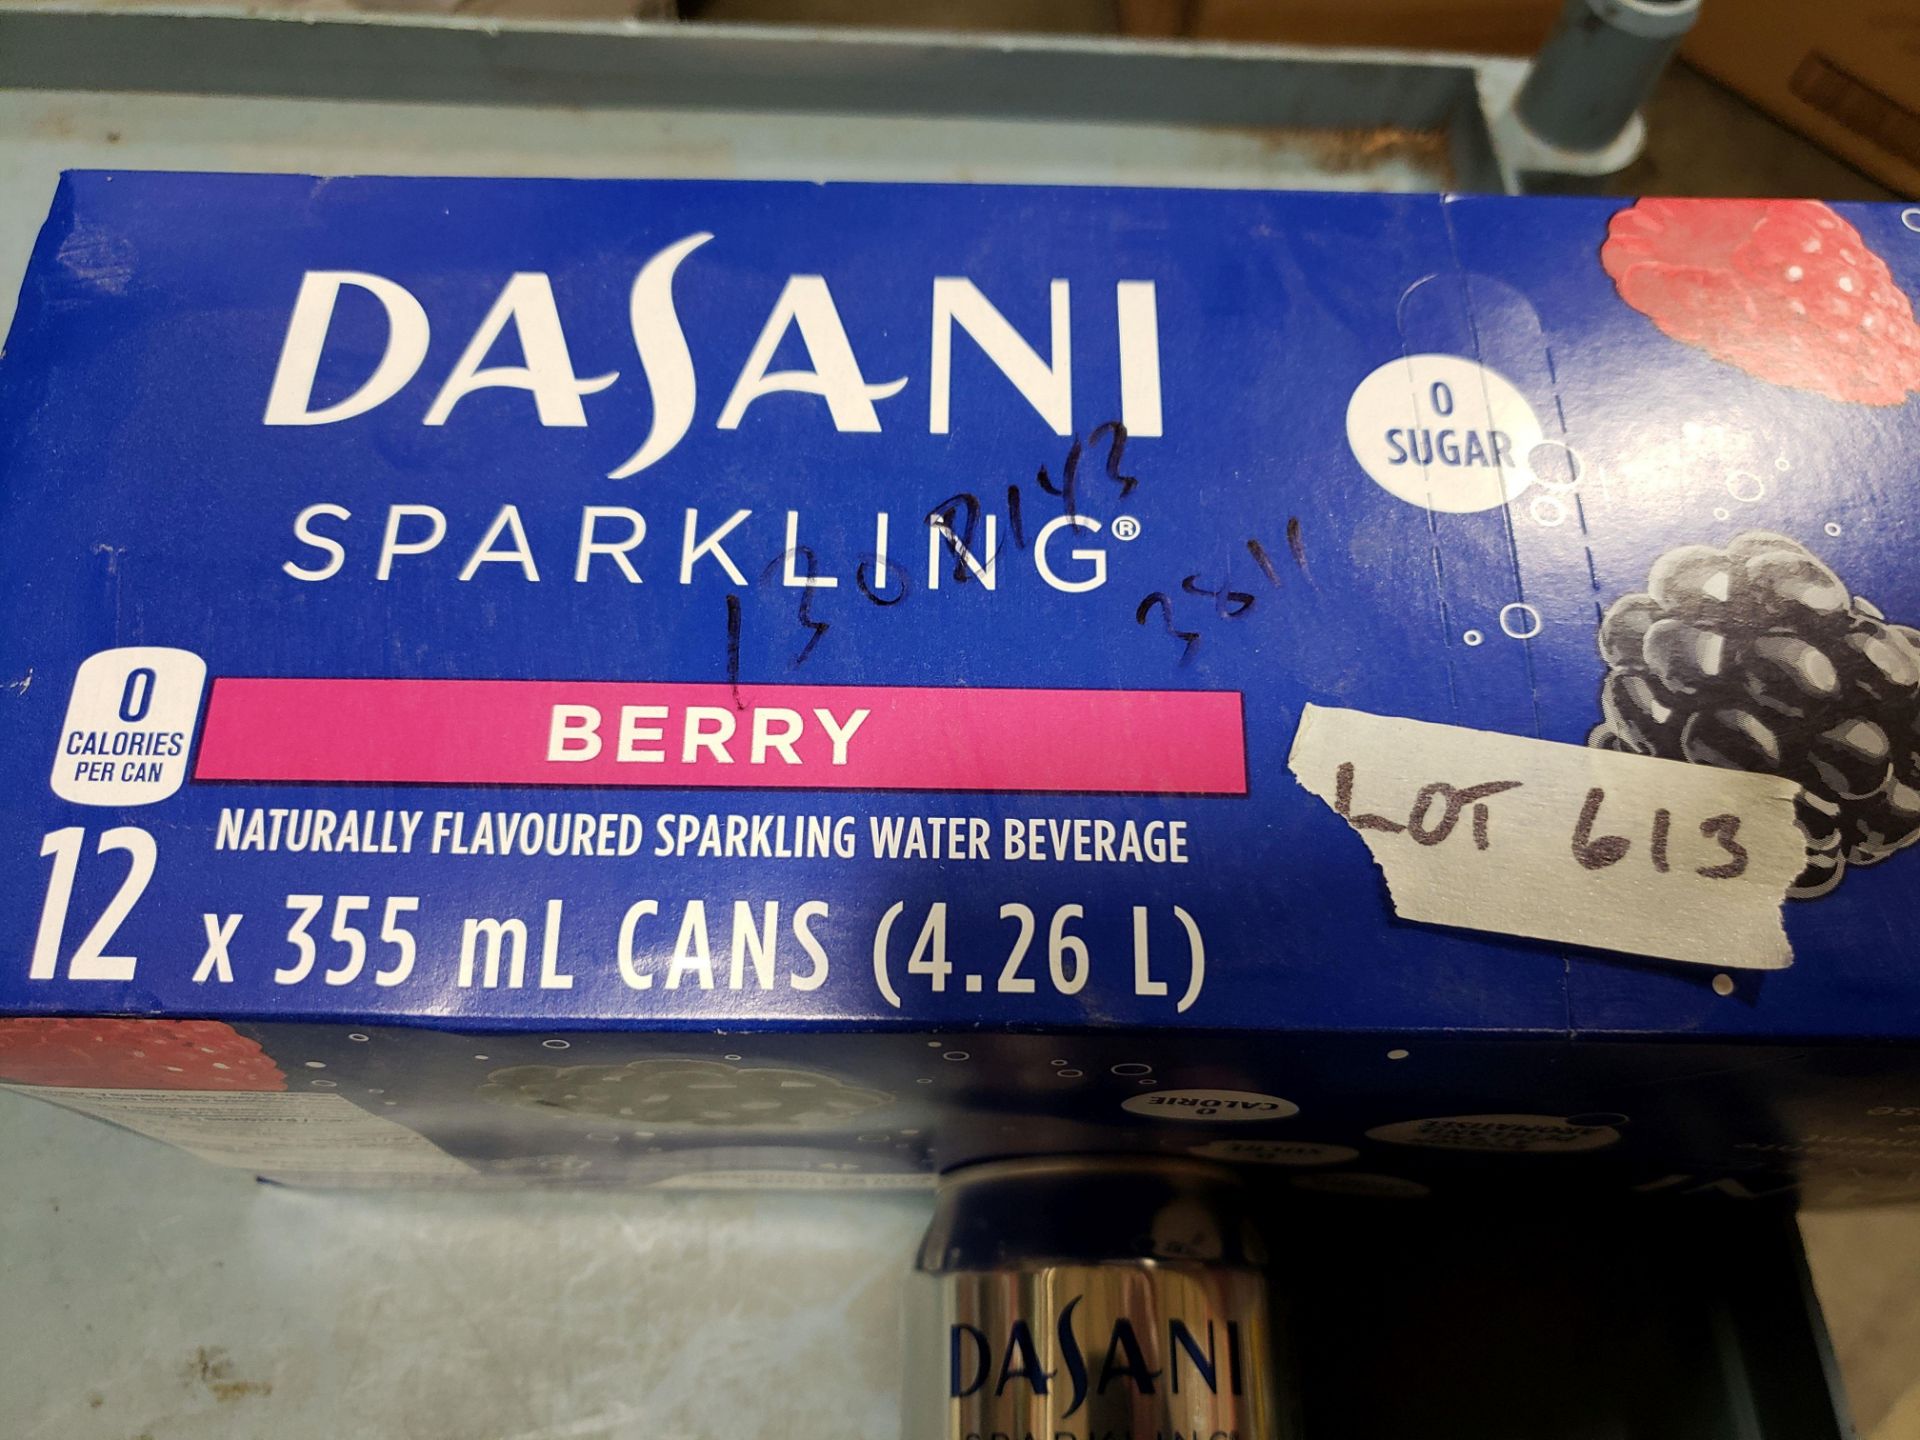 Dasani Sparkling Berry Water - 11 x 355ml Cans - Image 2 of 2